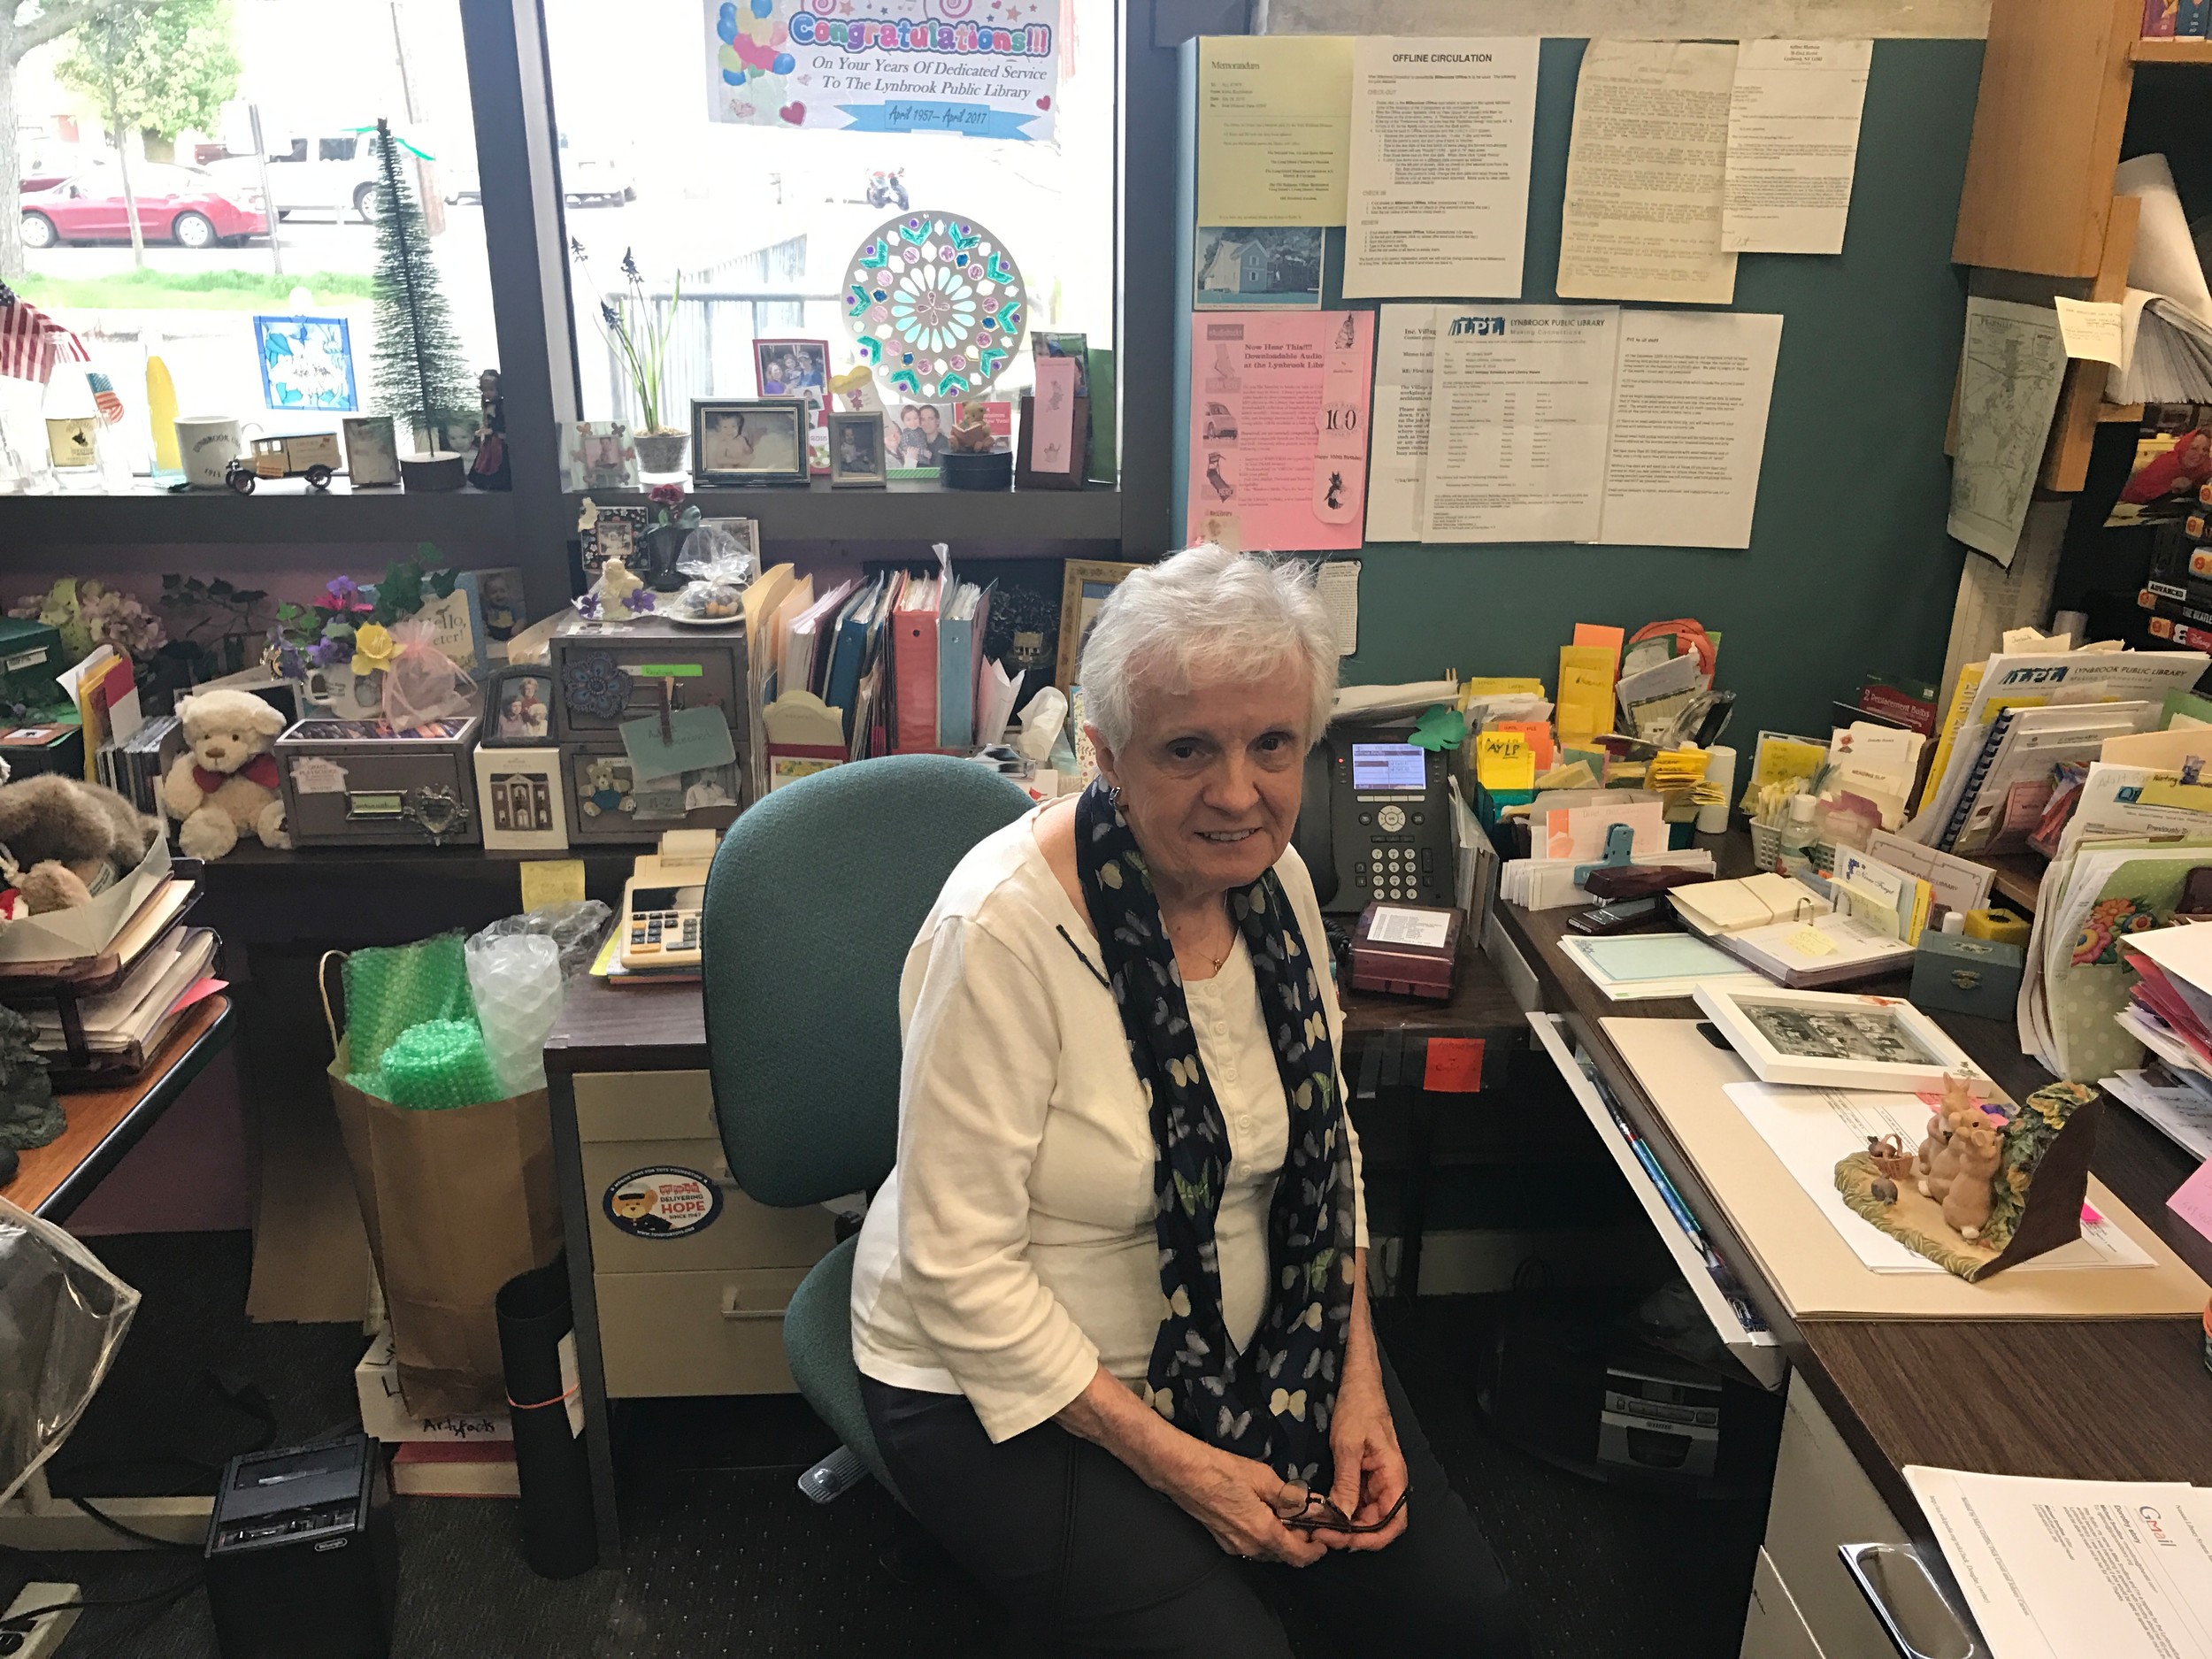 Dorothy Perrich began working at the Lynbrook Public Library in 1957. After 60 years servicing the community, she has no plans of retiring.